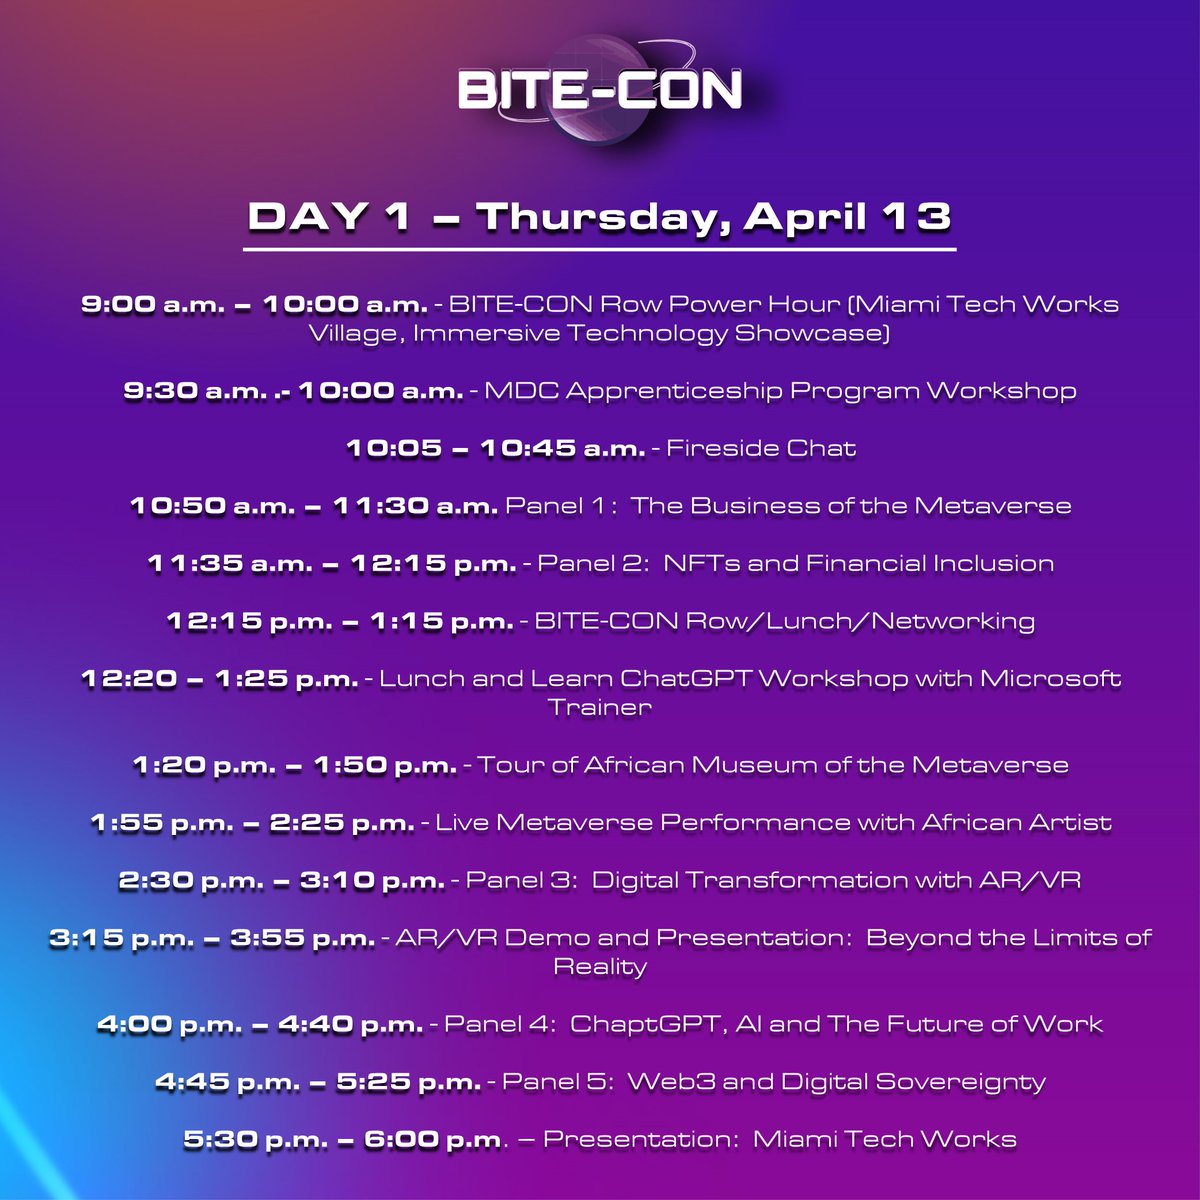 Here's the schedule for Thursday, April 13 (Day 1)! We can't wait!! BITE-CON is now FREE & open to all! Grab your FREE ticket now at bite-con.com